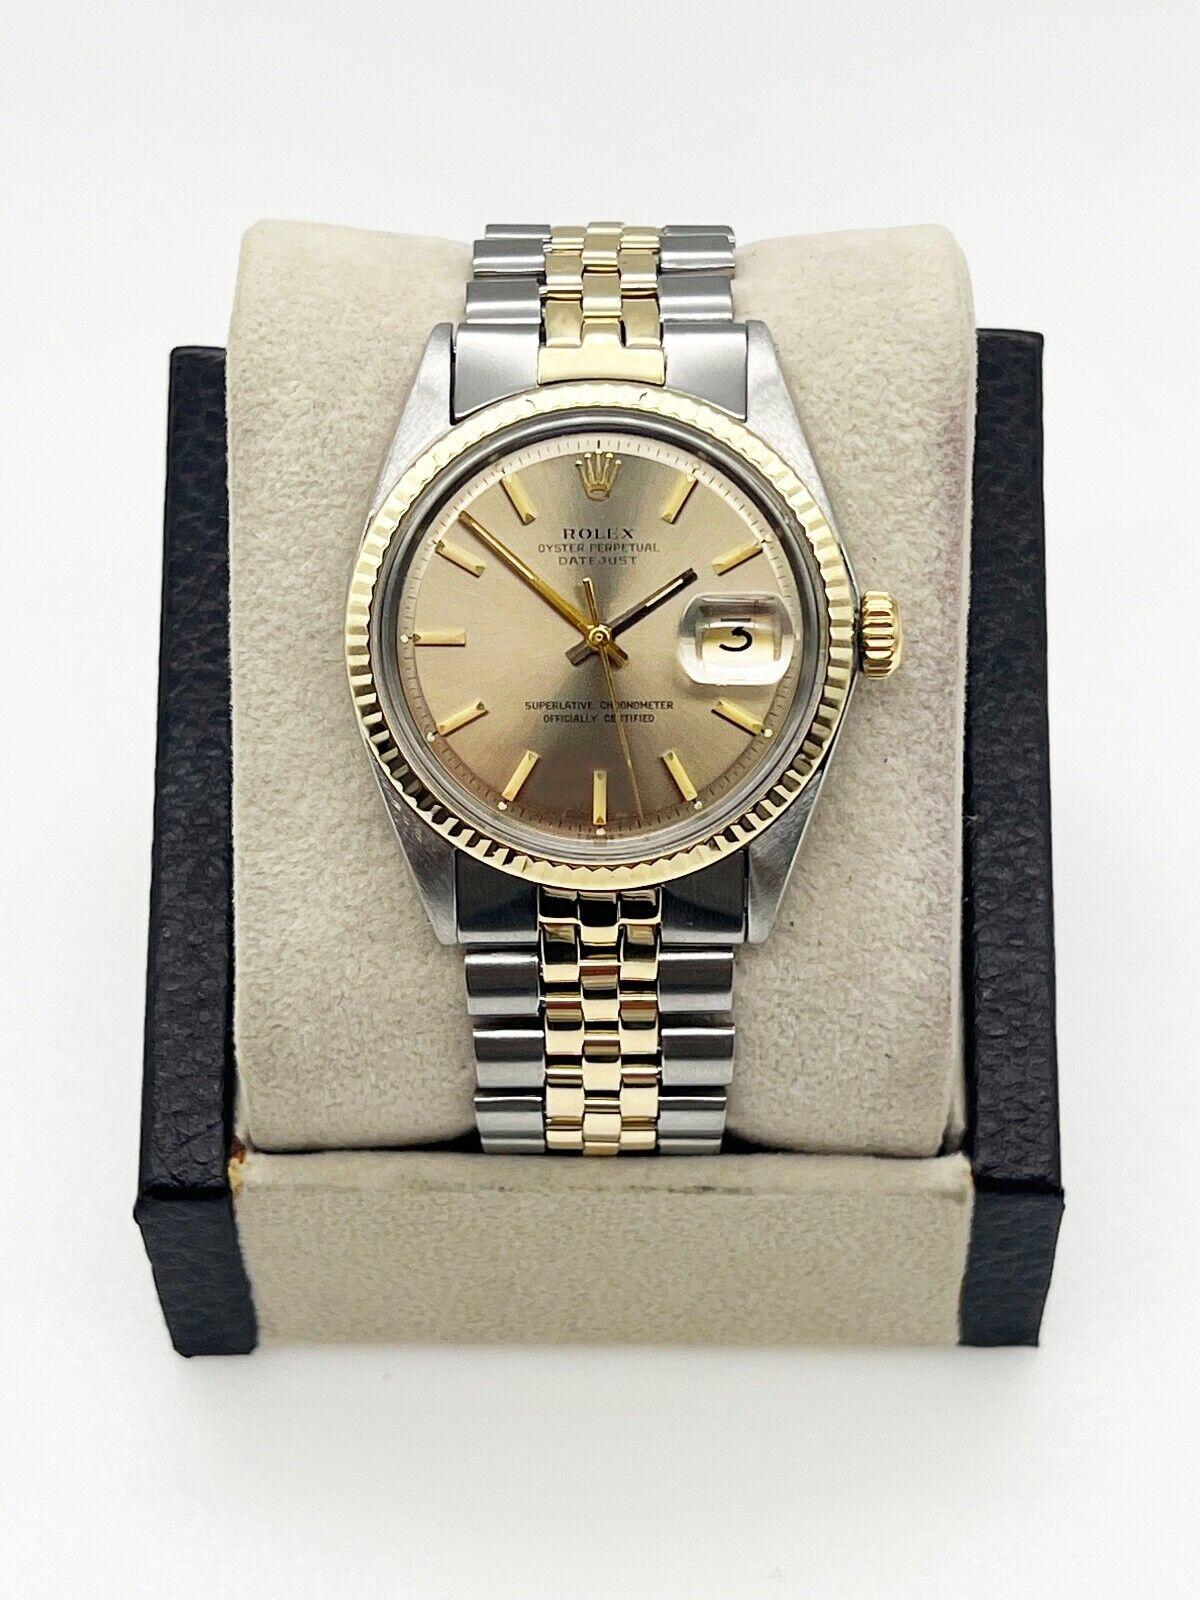 Rolex 1601 Datejust Pie Pan Dial 14K Yellow Gold Stainless Steel 1